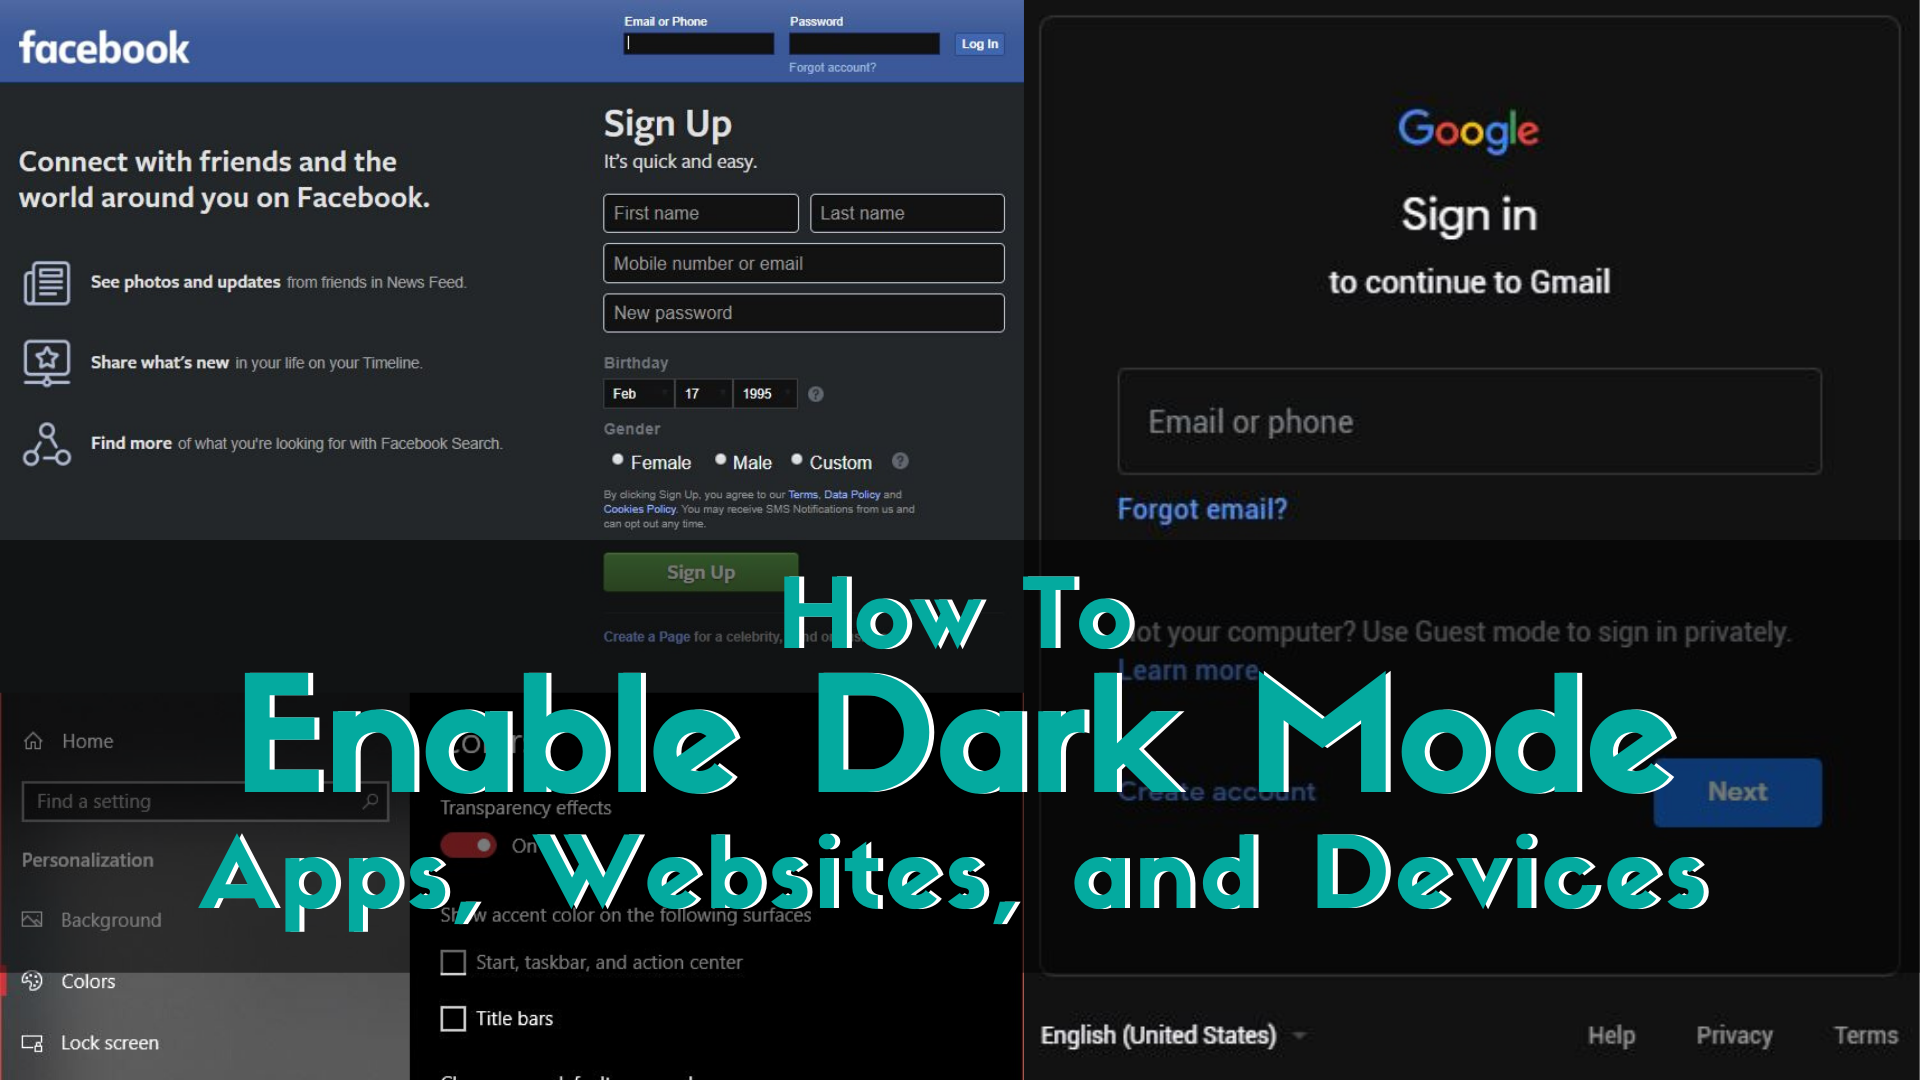 How To Enable Dark Mode: Apps, Websites, and Devices